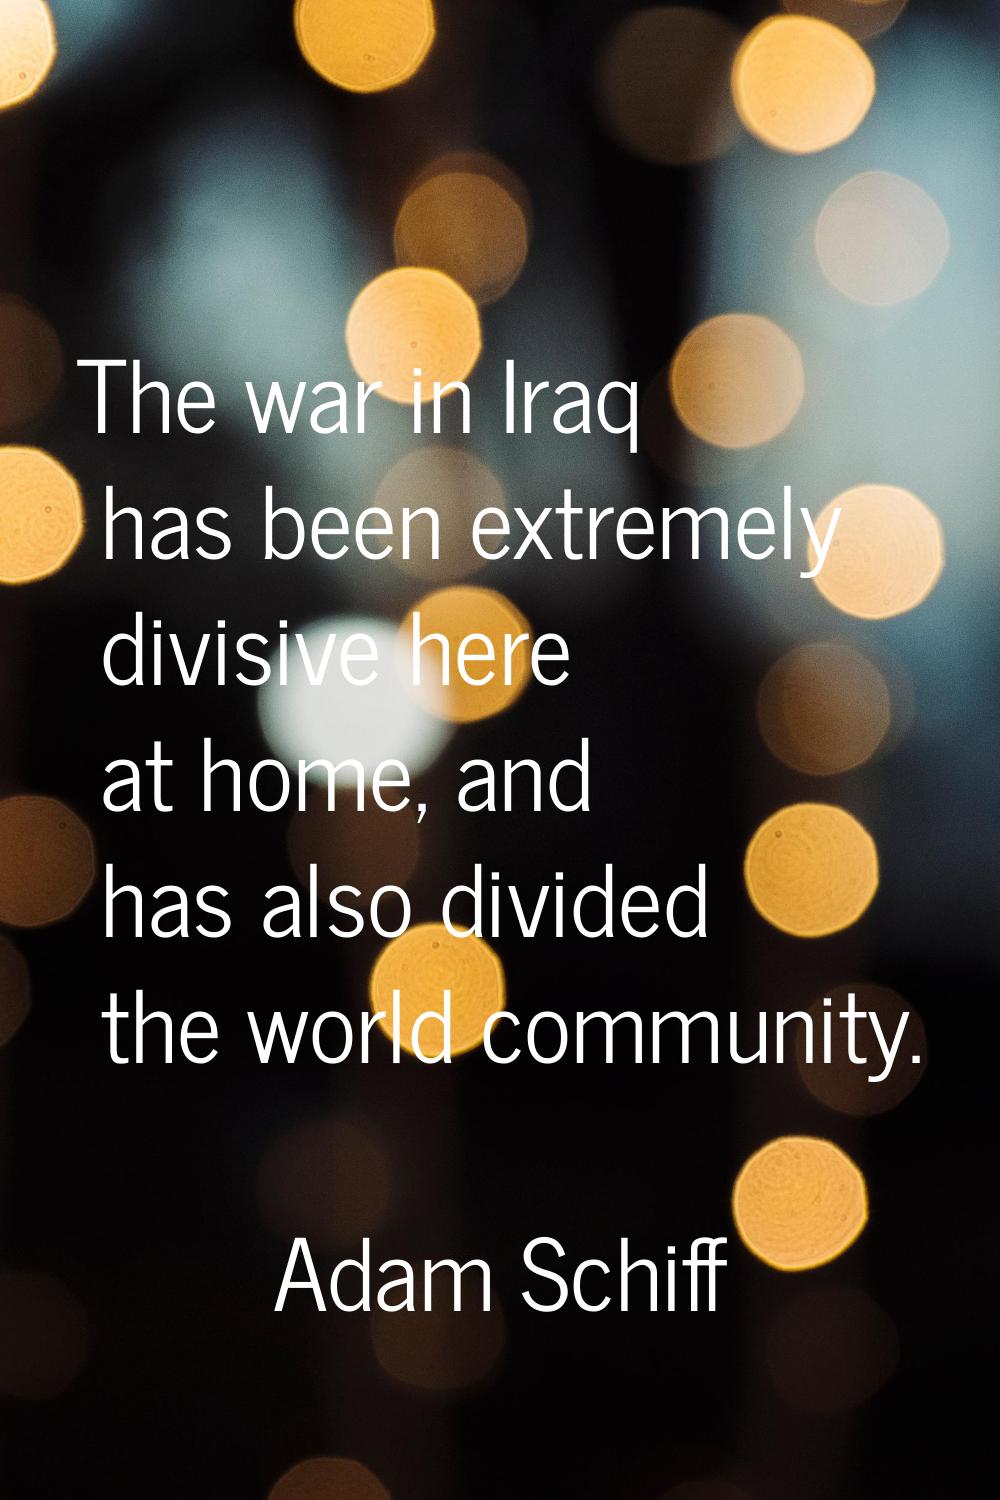 The war in Iraq has been extremely divisive here at home, and has also divided the world community.